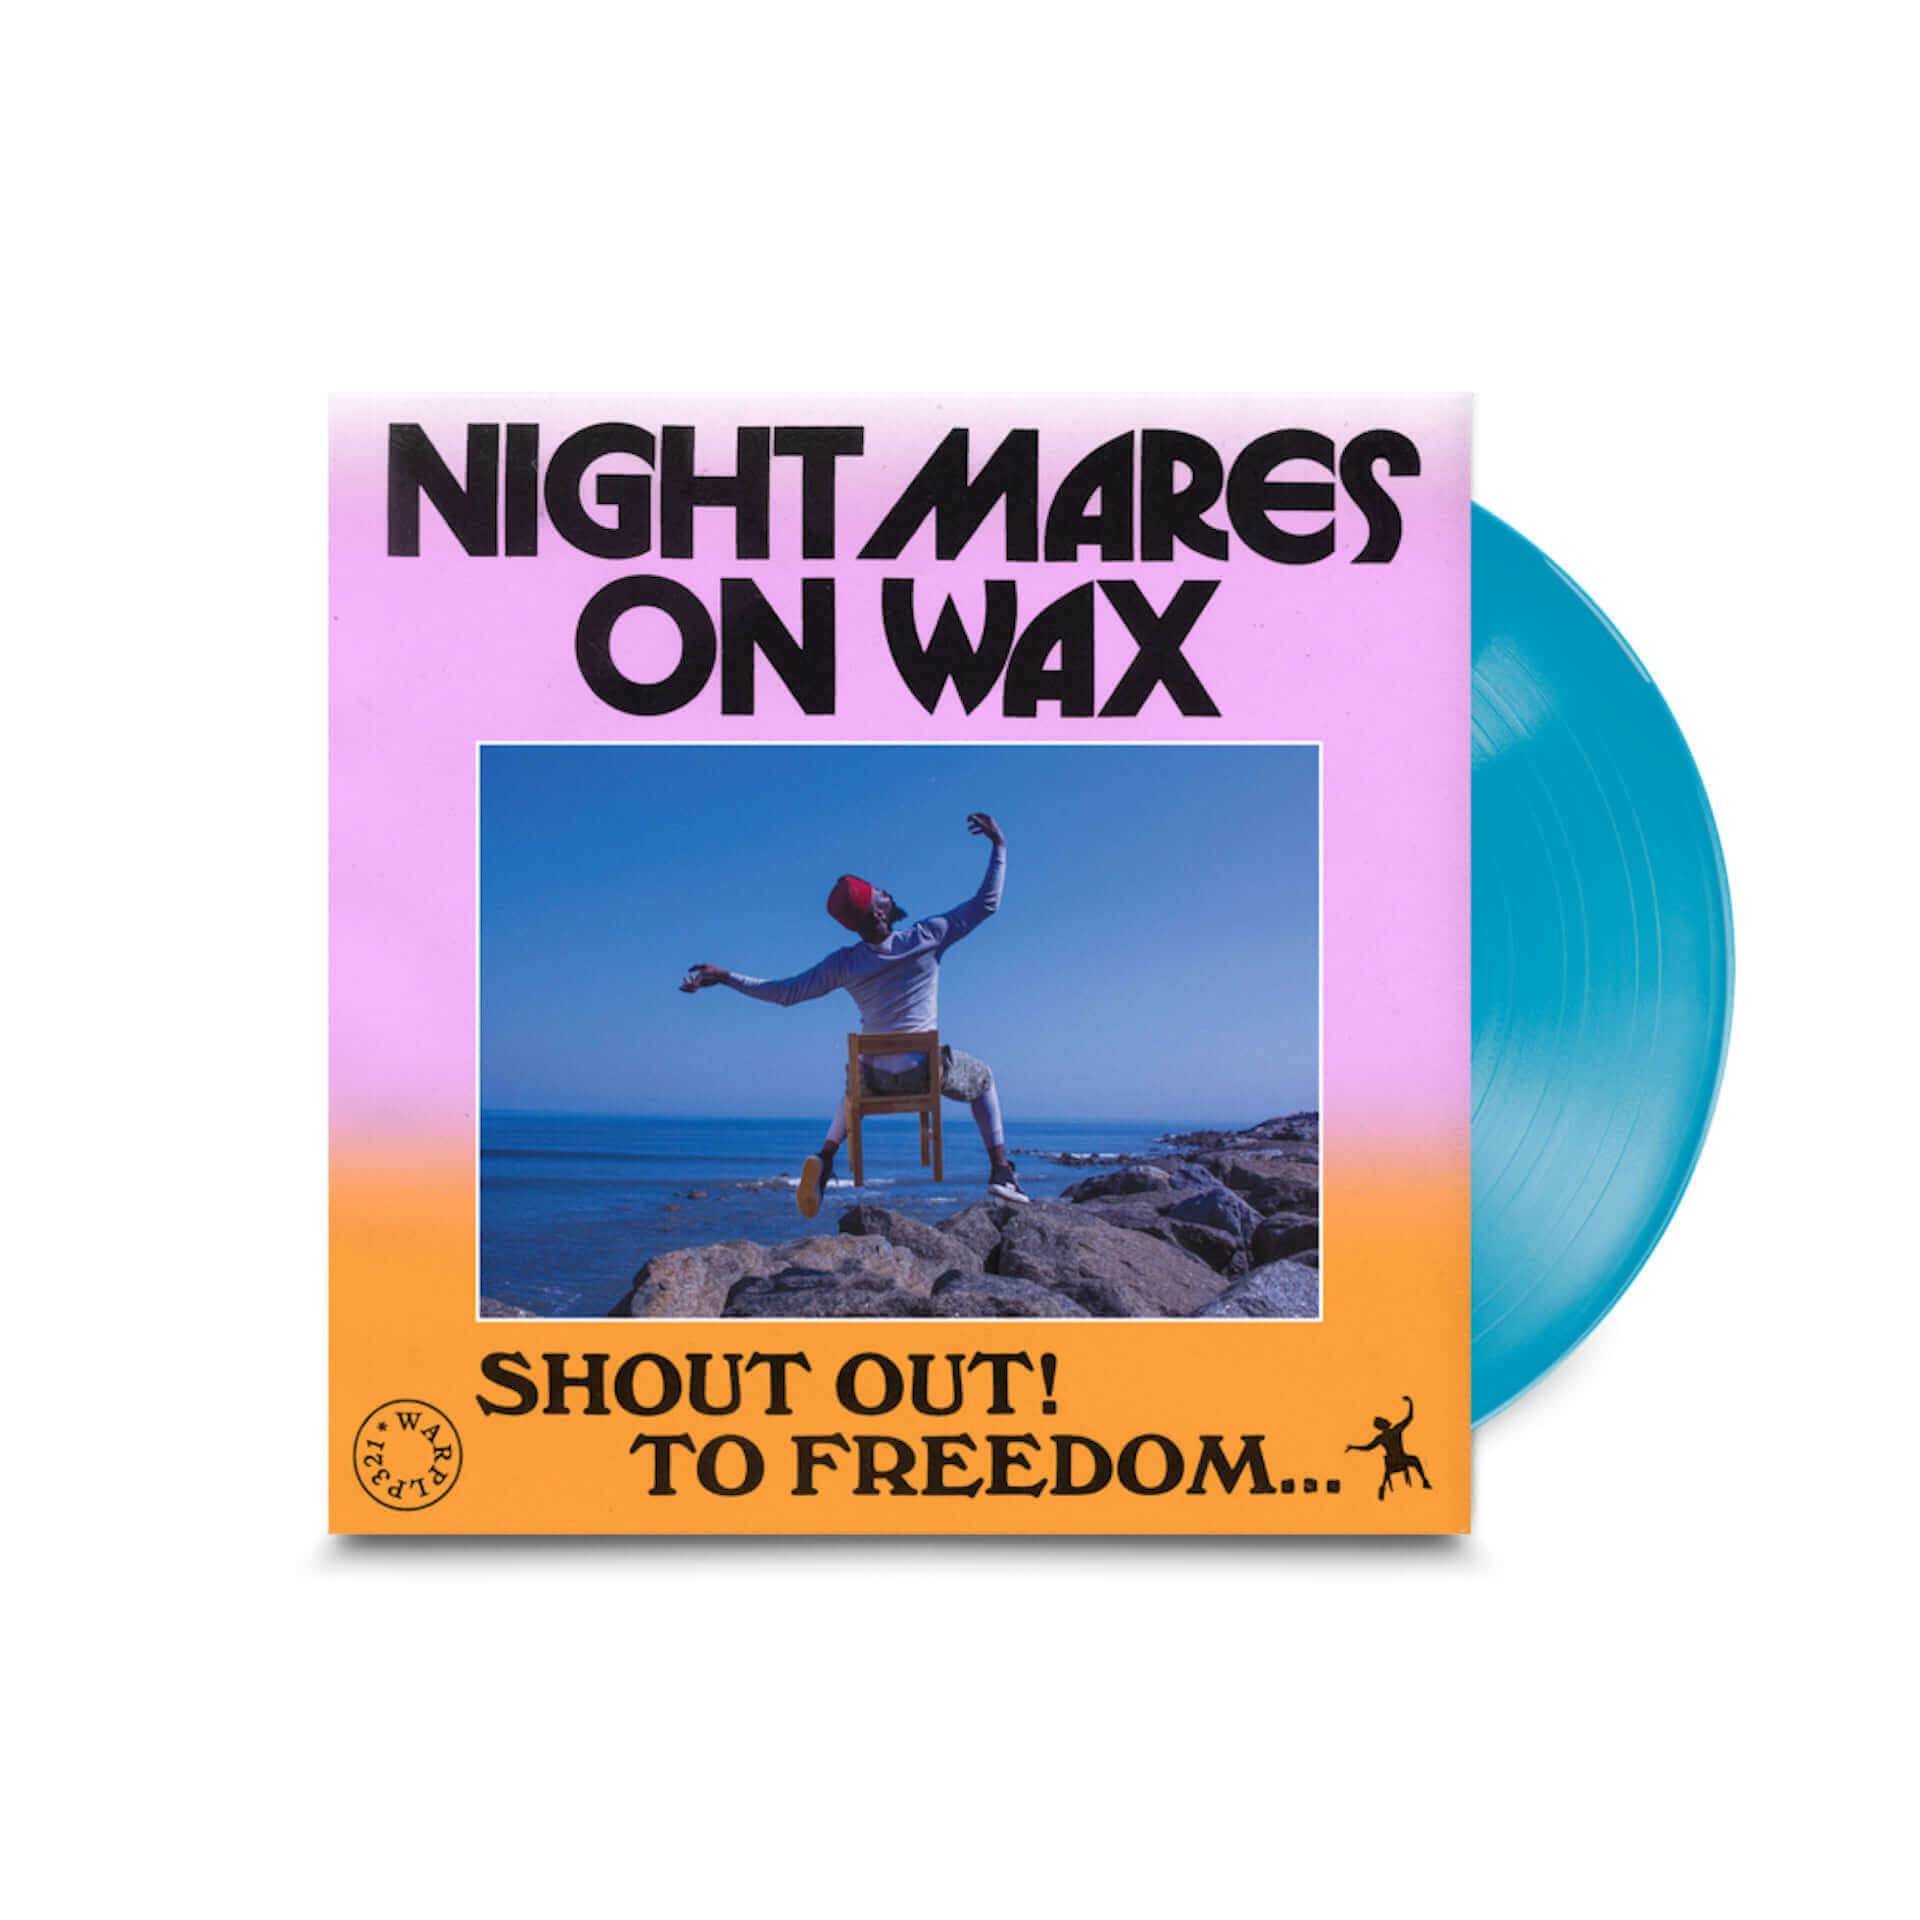 Nightmares On Waxの最新作『Shout Out！ To Freedom…』より“WONDER”のMVが公開！ art11108_night_mares_on_wax_03